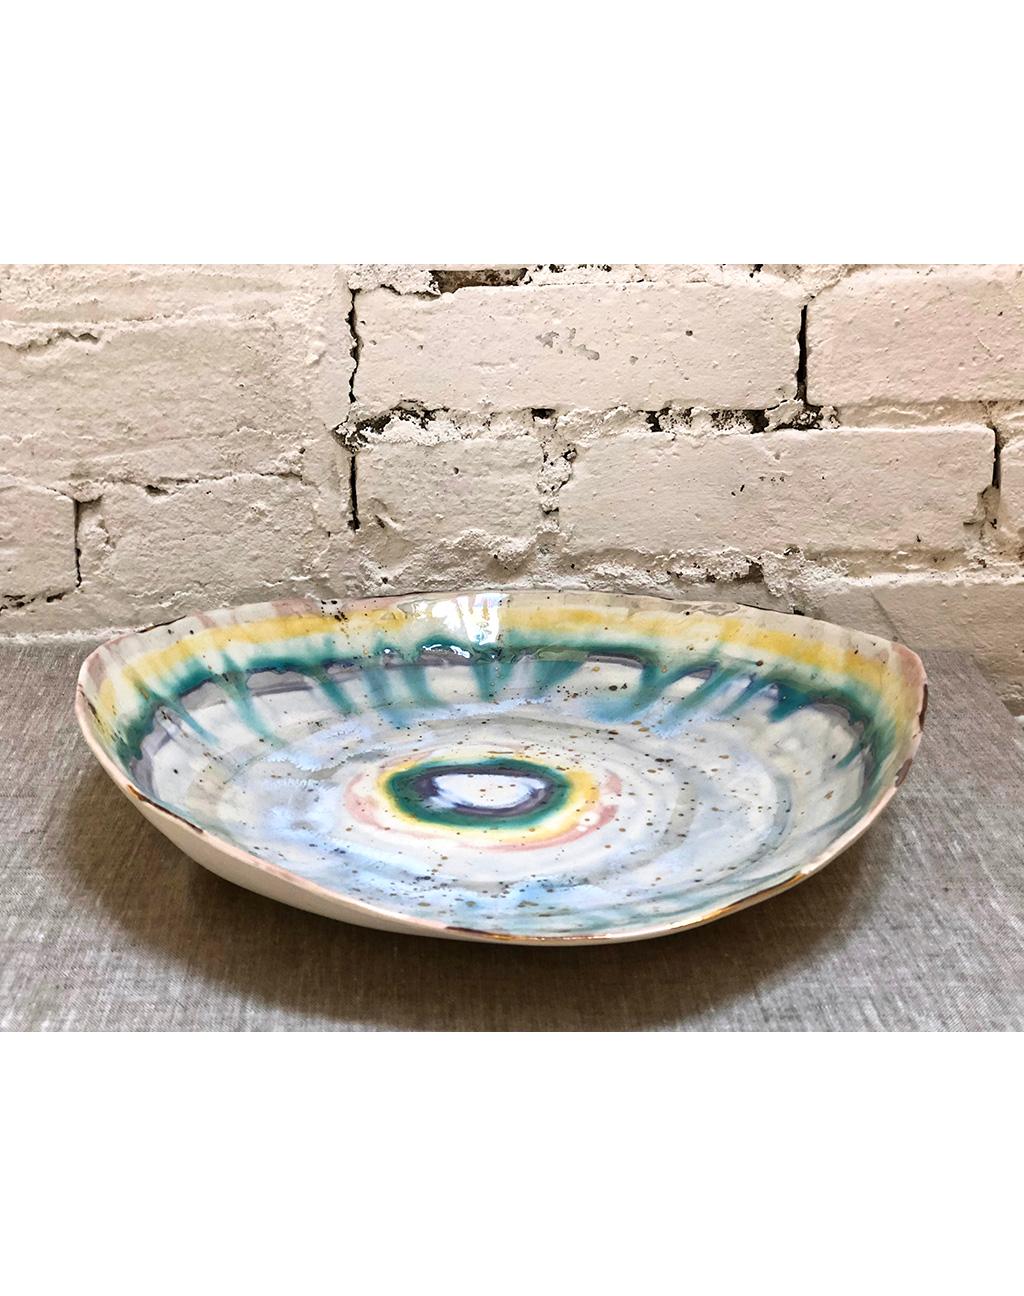 This extra large prism platter by Minh Singer is handbuilt in porcelain and intricately glazed with a rainbow of celadon glazes and 22-karat gold and mother-of-pearl lusters. Singer's mesmerizing glaze technique requires several firings.

Each